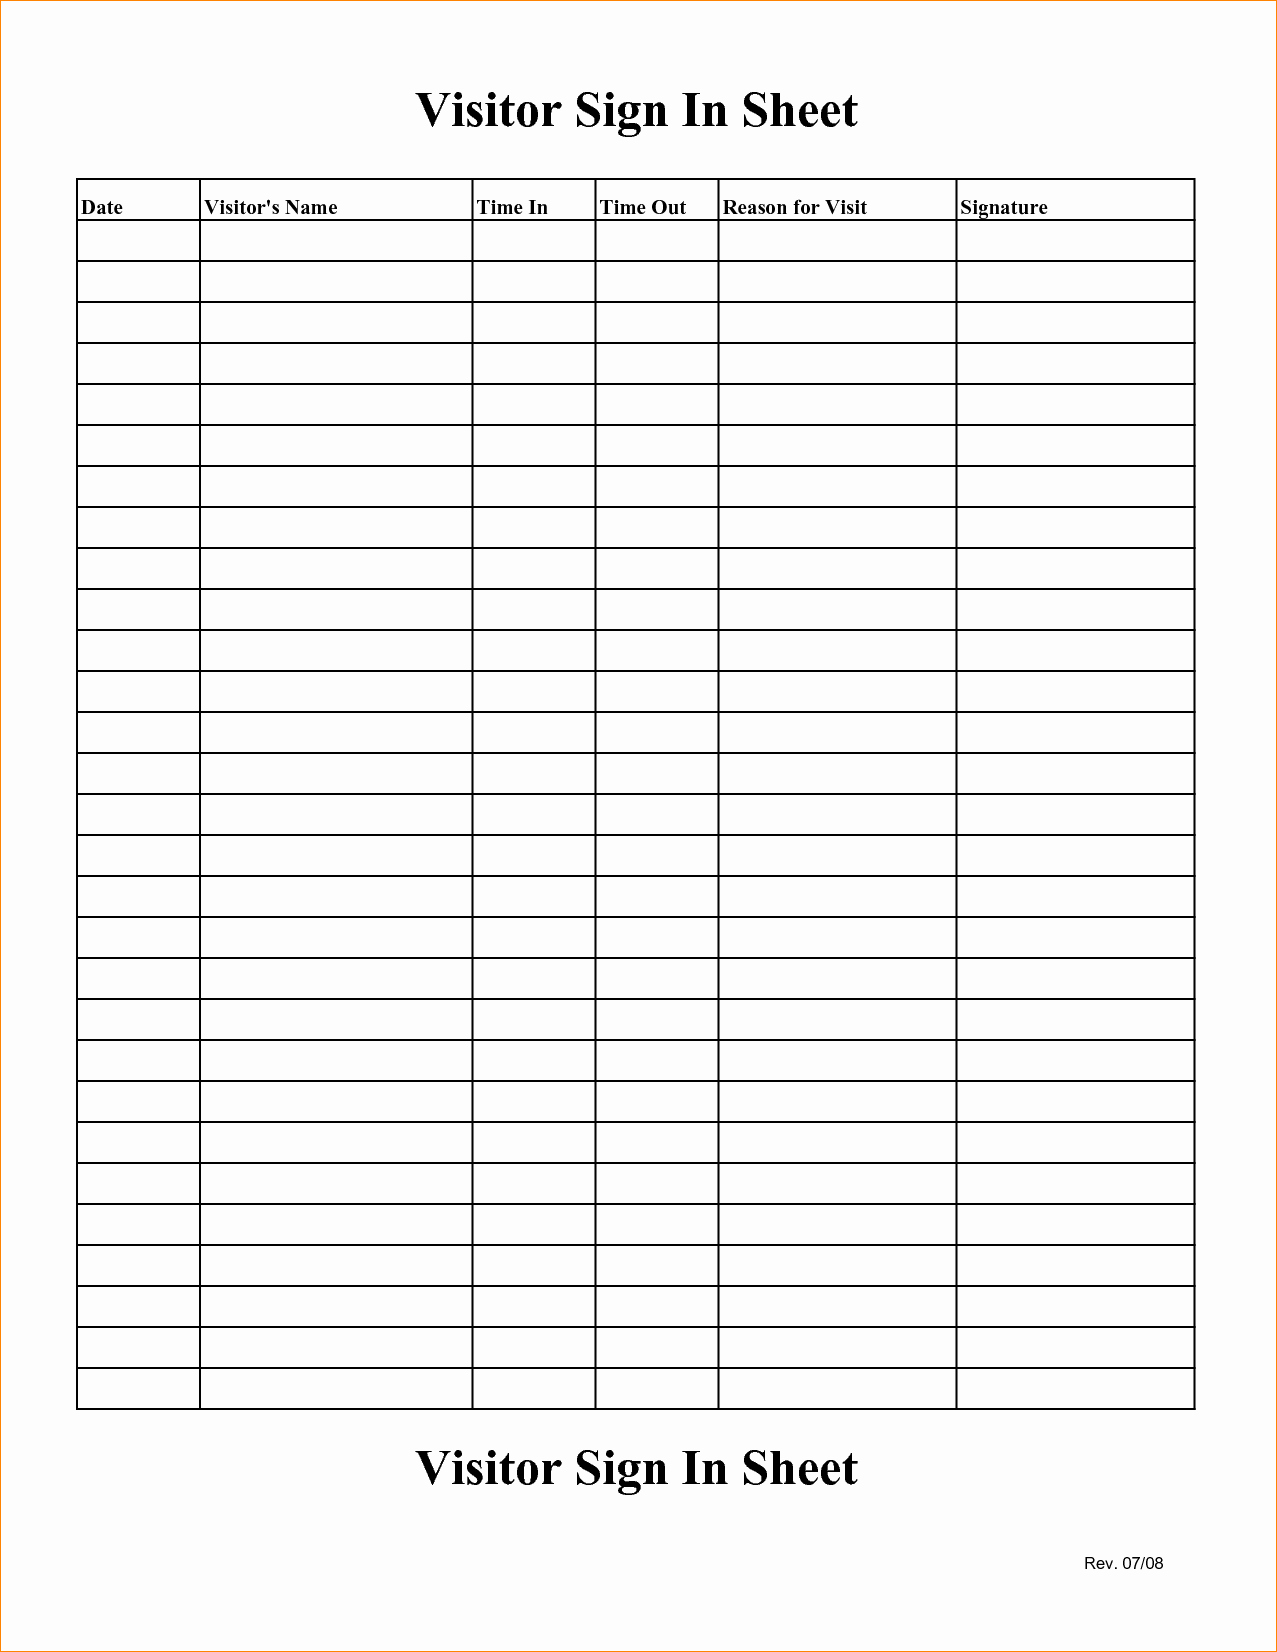 Example Of Sign In Sheet Unique Signature Sheet Template Portablegasgrillweber